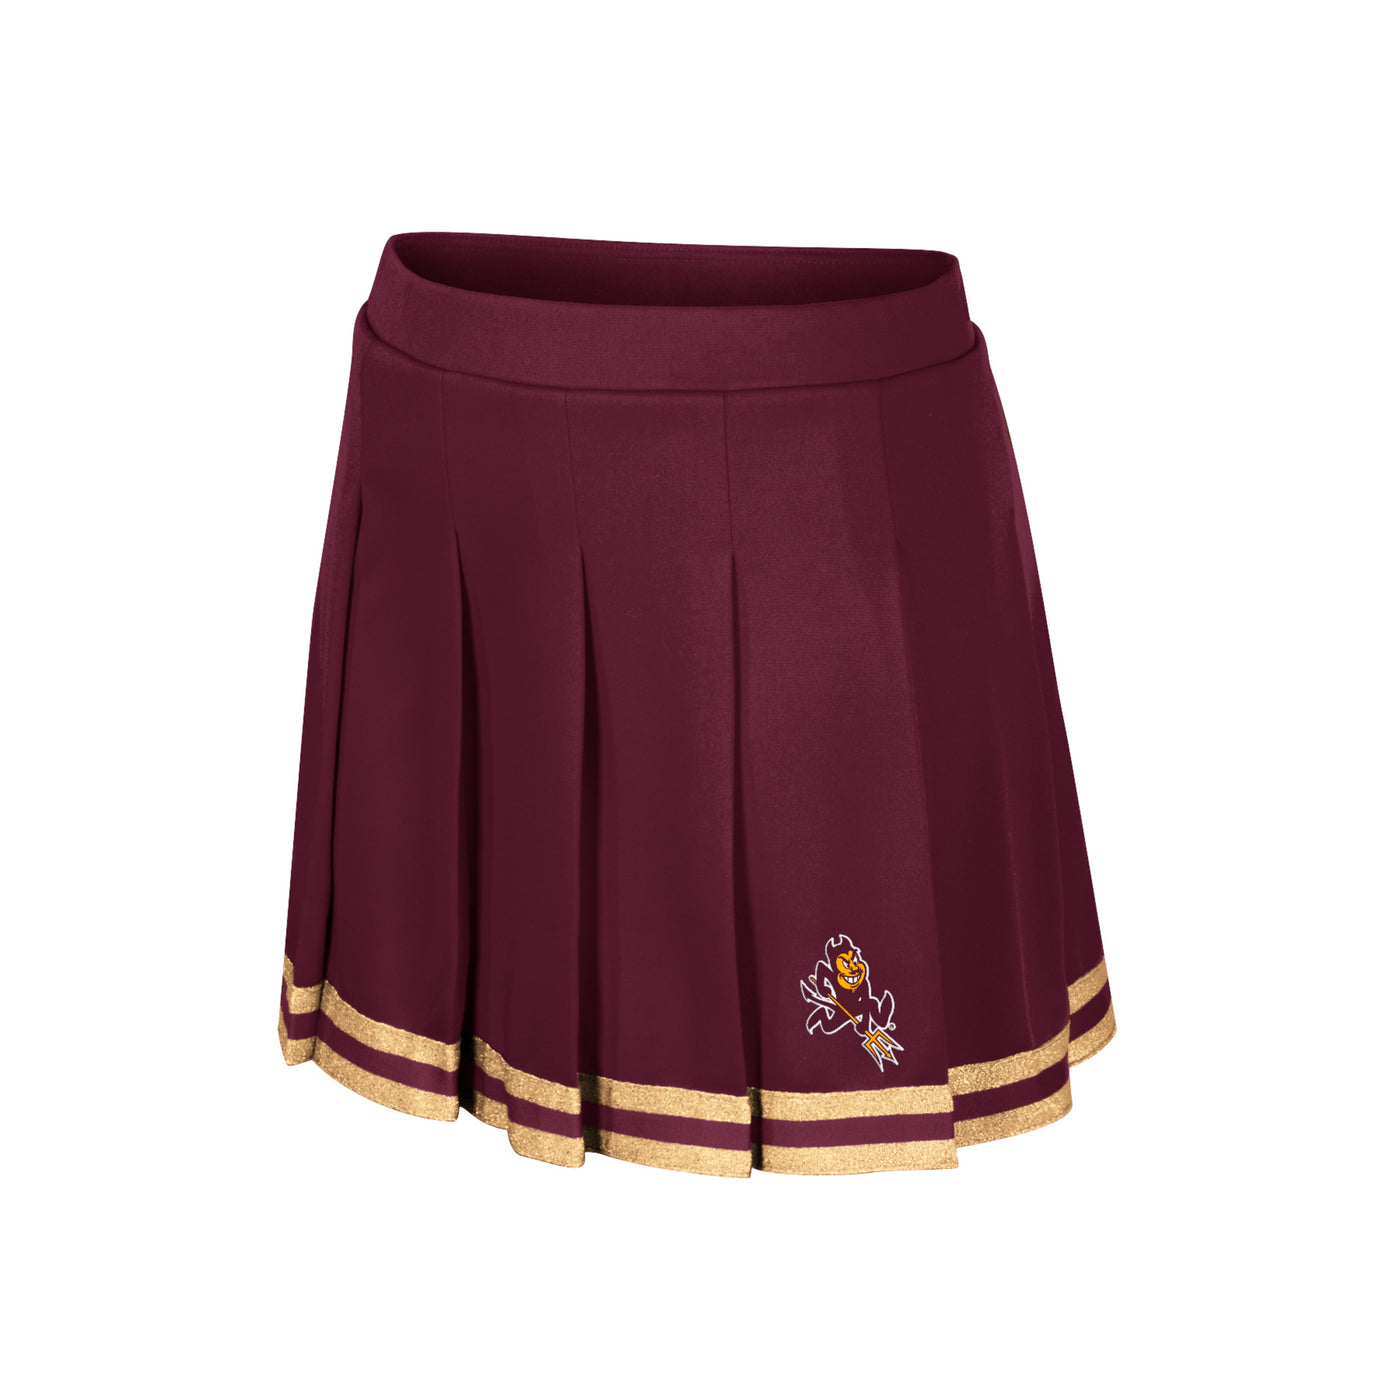 ASU maroon cheer skirt with two gold glitter stripes at the rim of the skirt. There is also a small sparky mascot towards the end of the skirt.